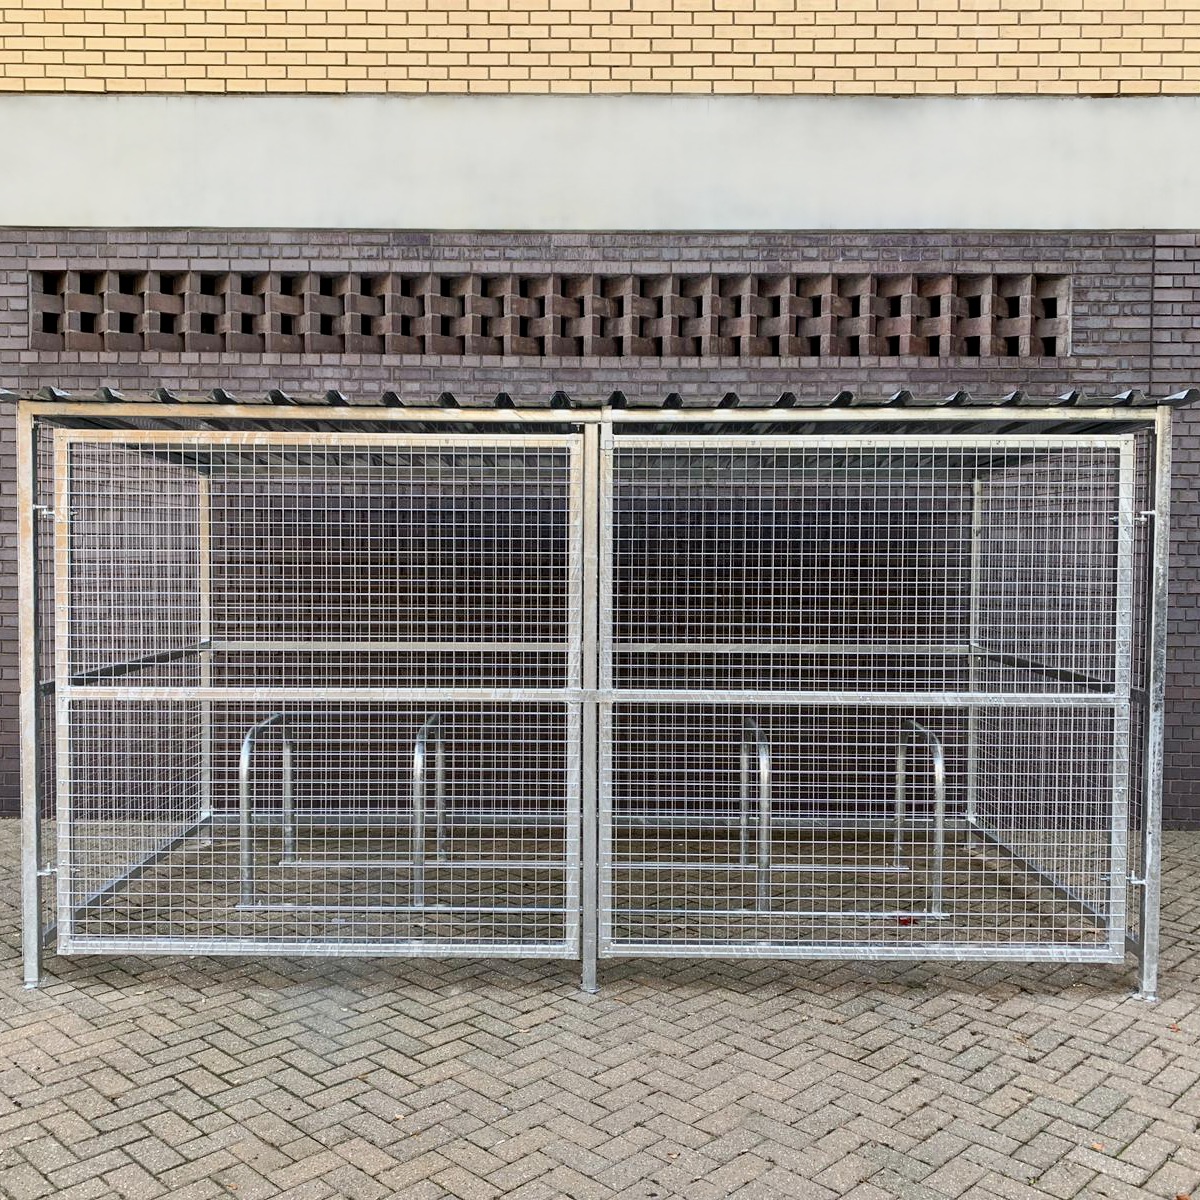 Cambridge 10 space outdoor cycle shelter